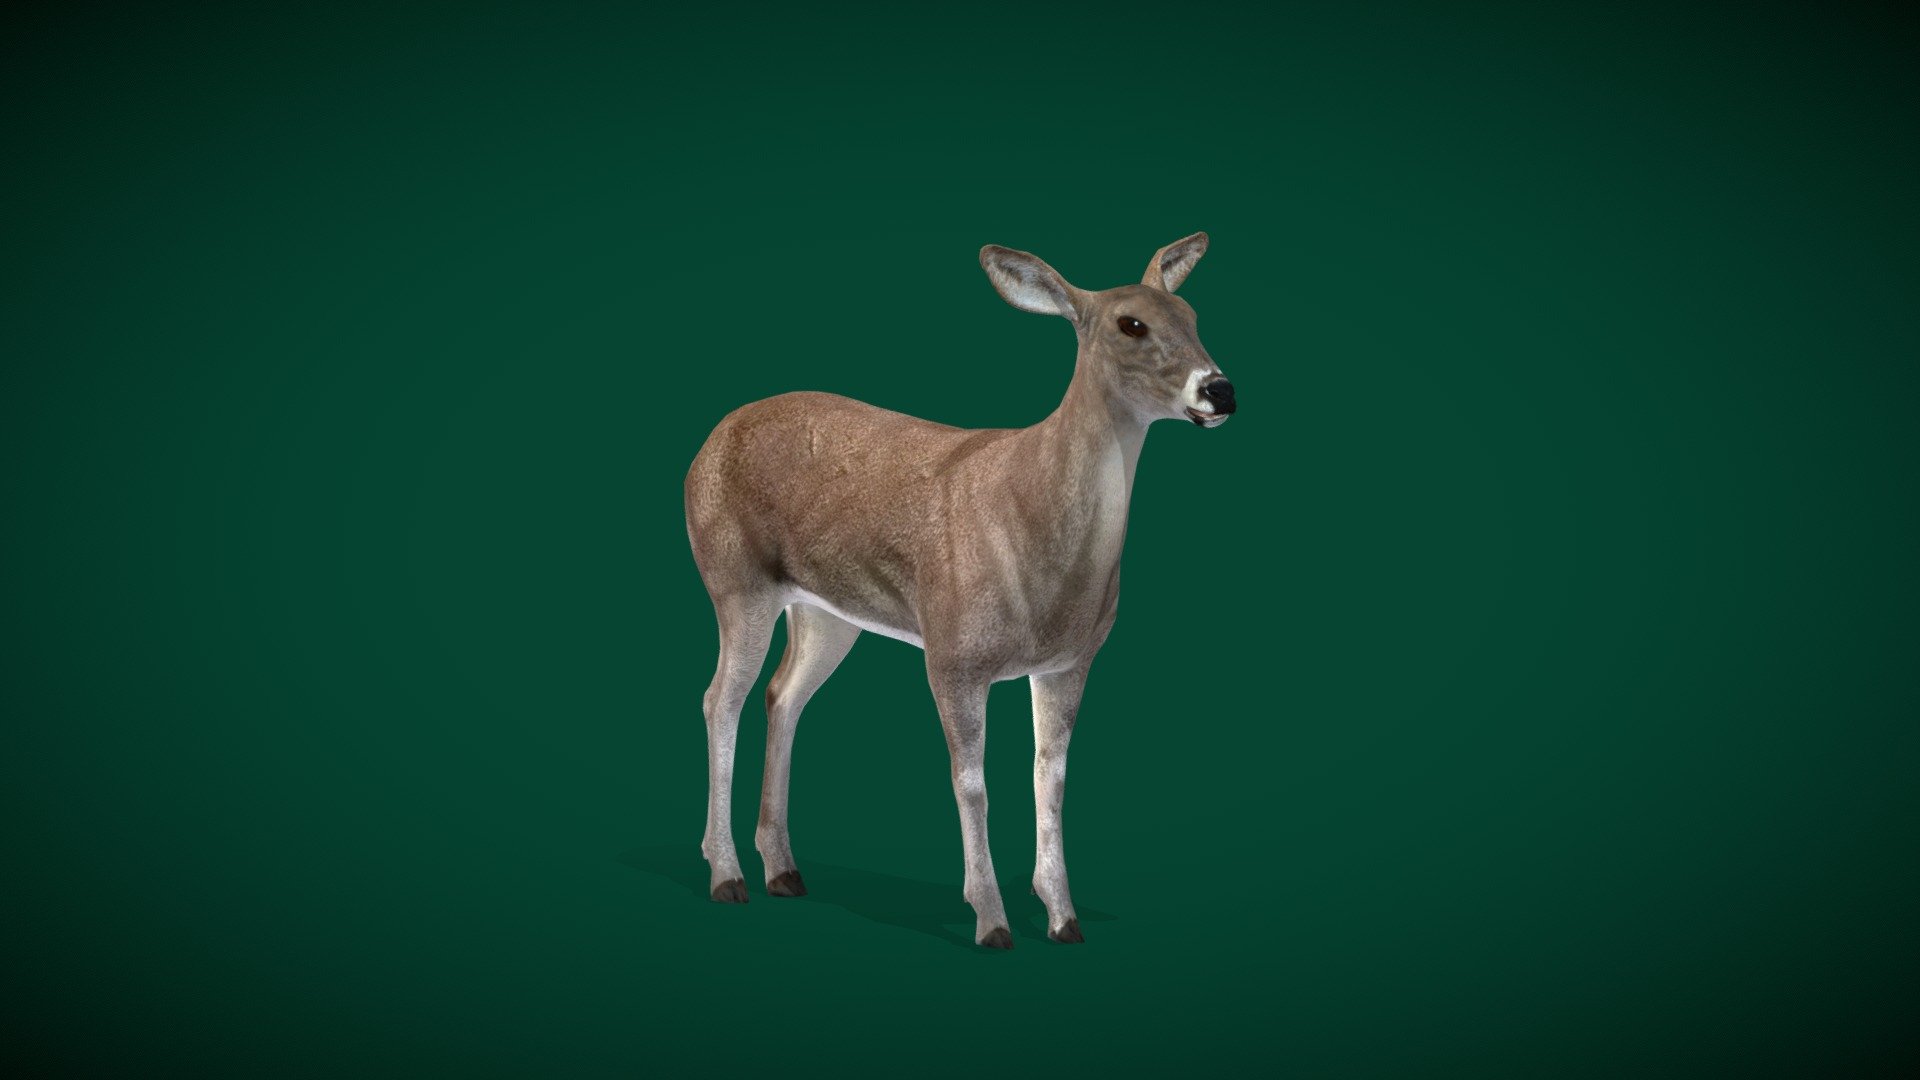 White-Tailed Deer FeMale (Virginia deer )Herbivorous ,deer species

Odocoileus virginianus Animal Mammal Animalia (Whitetail)  high mountain terrains of the Andes

1 Draw Calls

Lowpoly 

Game Ready Asset

Subdivision Surface Ready

8- Animations

4K PBR Textures Material

Unreal FBX (Unreal 4,5 Plus)

Unity FBX

Blend File 3.6.5 LTS

USDZ File (AR Ready). Real Scale Dimension (Xcode ,Reality Composer, Keynote Ready)

Textures Files

GLB File (Unreal 5.1 Plus Native Support)


Gltf File ( Spark AR, Lens Studio(SnapChat) , Effector(Tiktok) , Spline, Play Canvas,Omiverse ) Compatible




Triangles -7473   



Faces -4252

Edges -7981

Vertices -3735

Diffuse, Metallic, Roughness , Normal Map ,Specular Map,AO
 The white-tailed deer, also known commonly as the whitetail and the Virginia deer, is a medium-sized species of deer native to North America, Central America, and South America as far south as Peru and Bolivia, where it predominately inhabits high mountain terrains of the Andes. Wikipedia - White Tailed Deer  Female (Lowpoly) - Buy Royalty Free 3D model by Nyilonelycompany 3d model